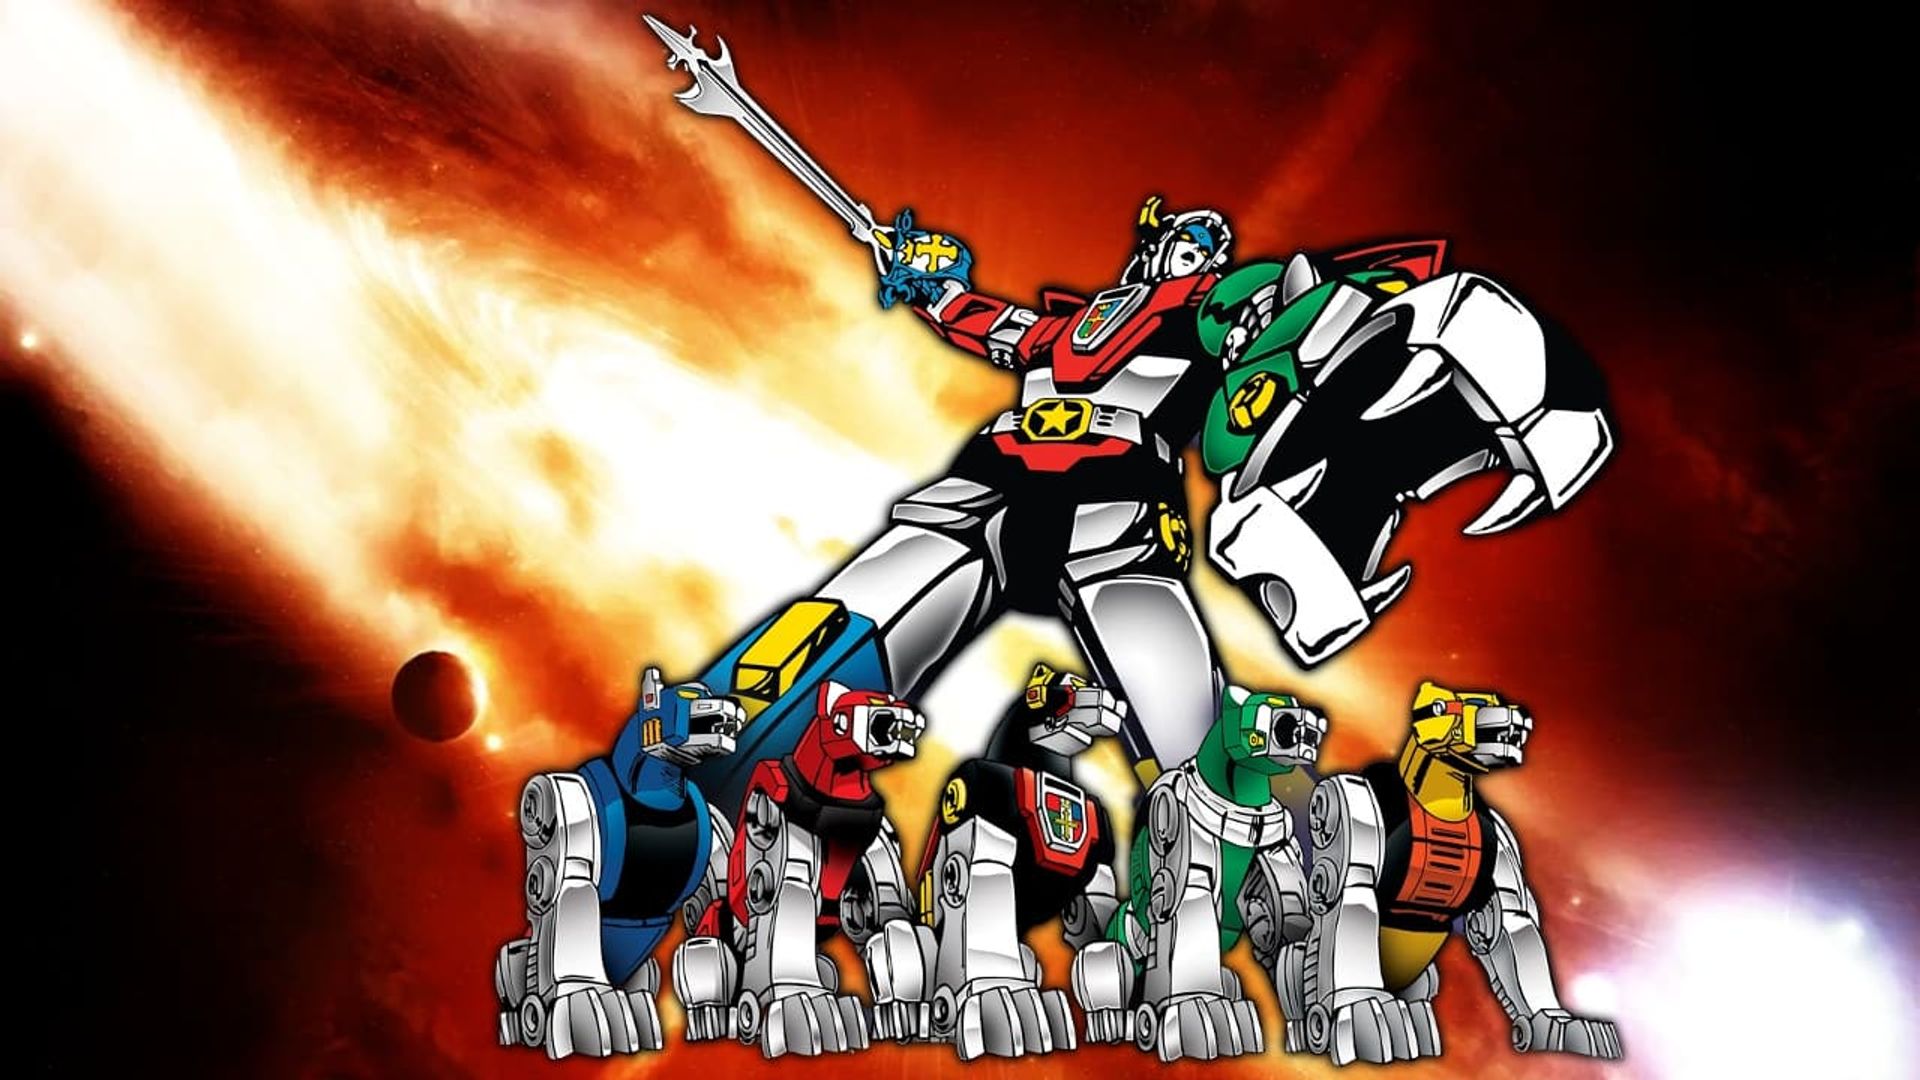 Voltron: Defender of the Universe background